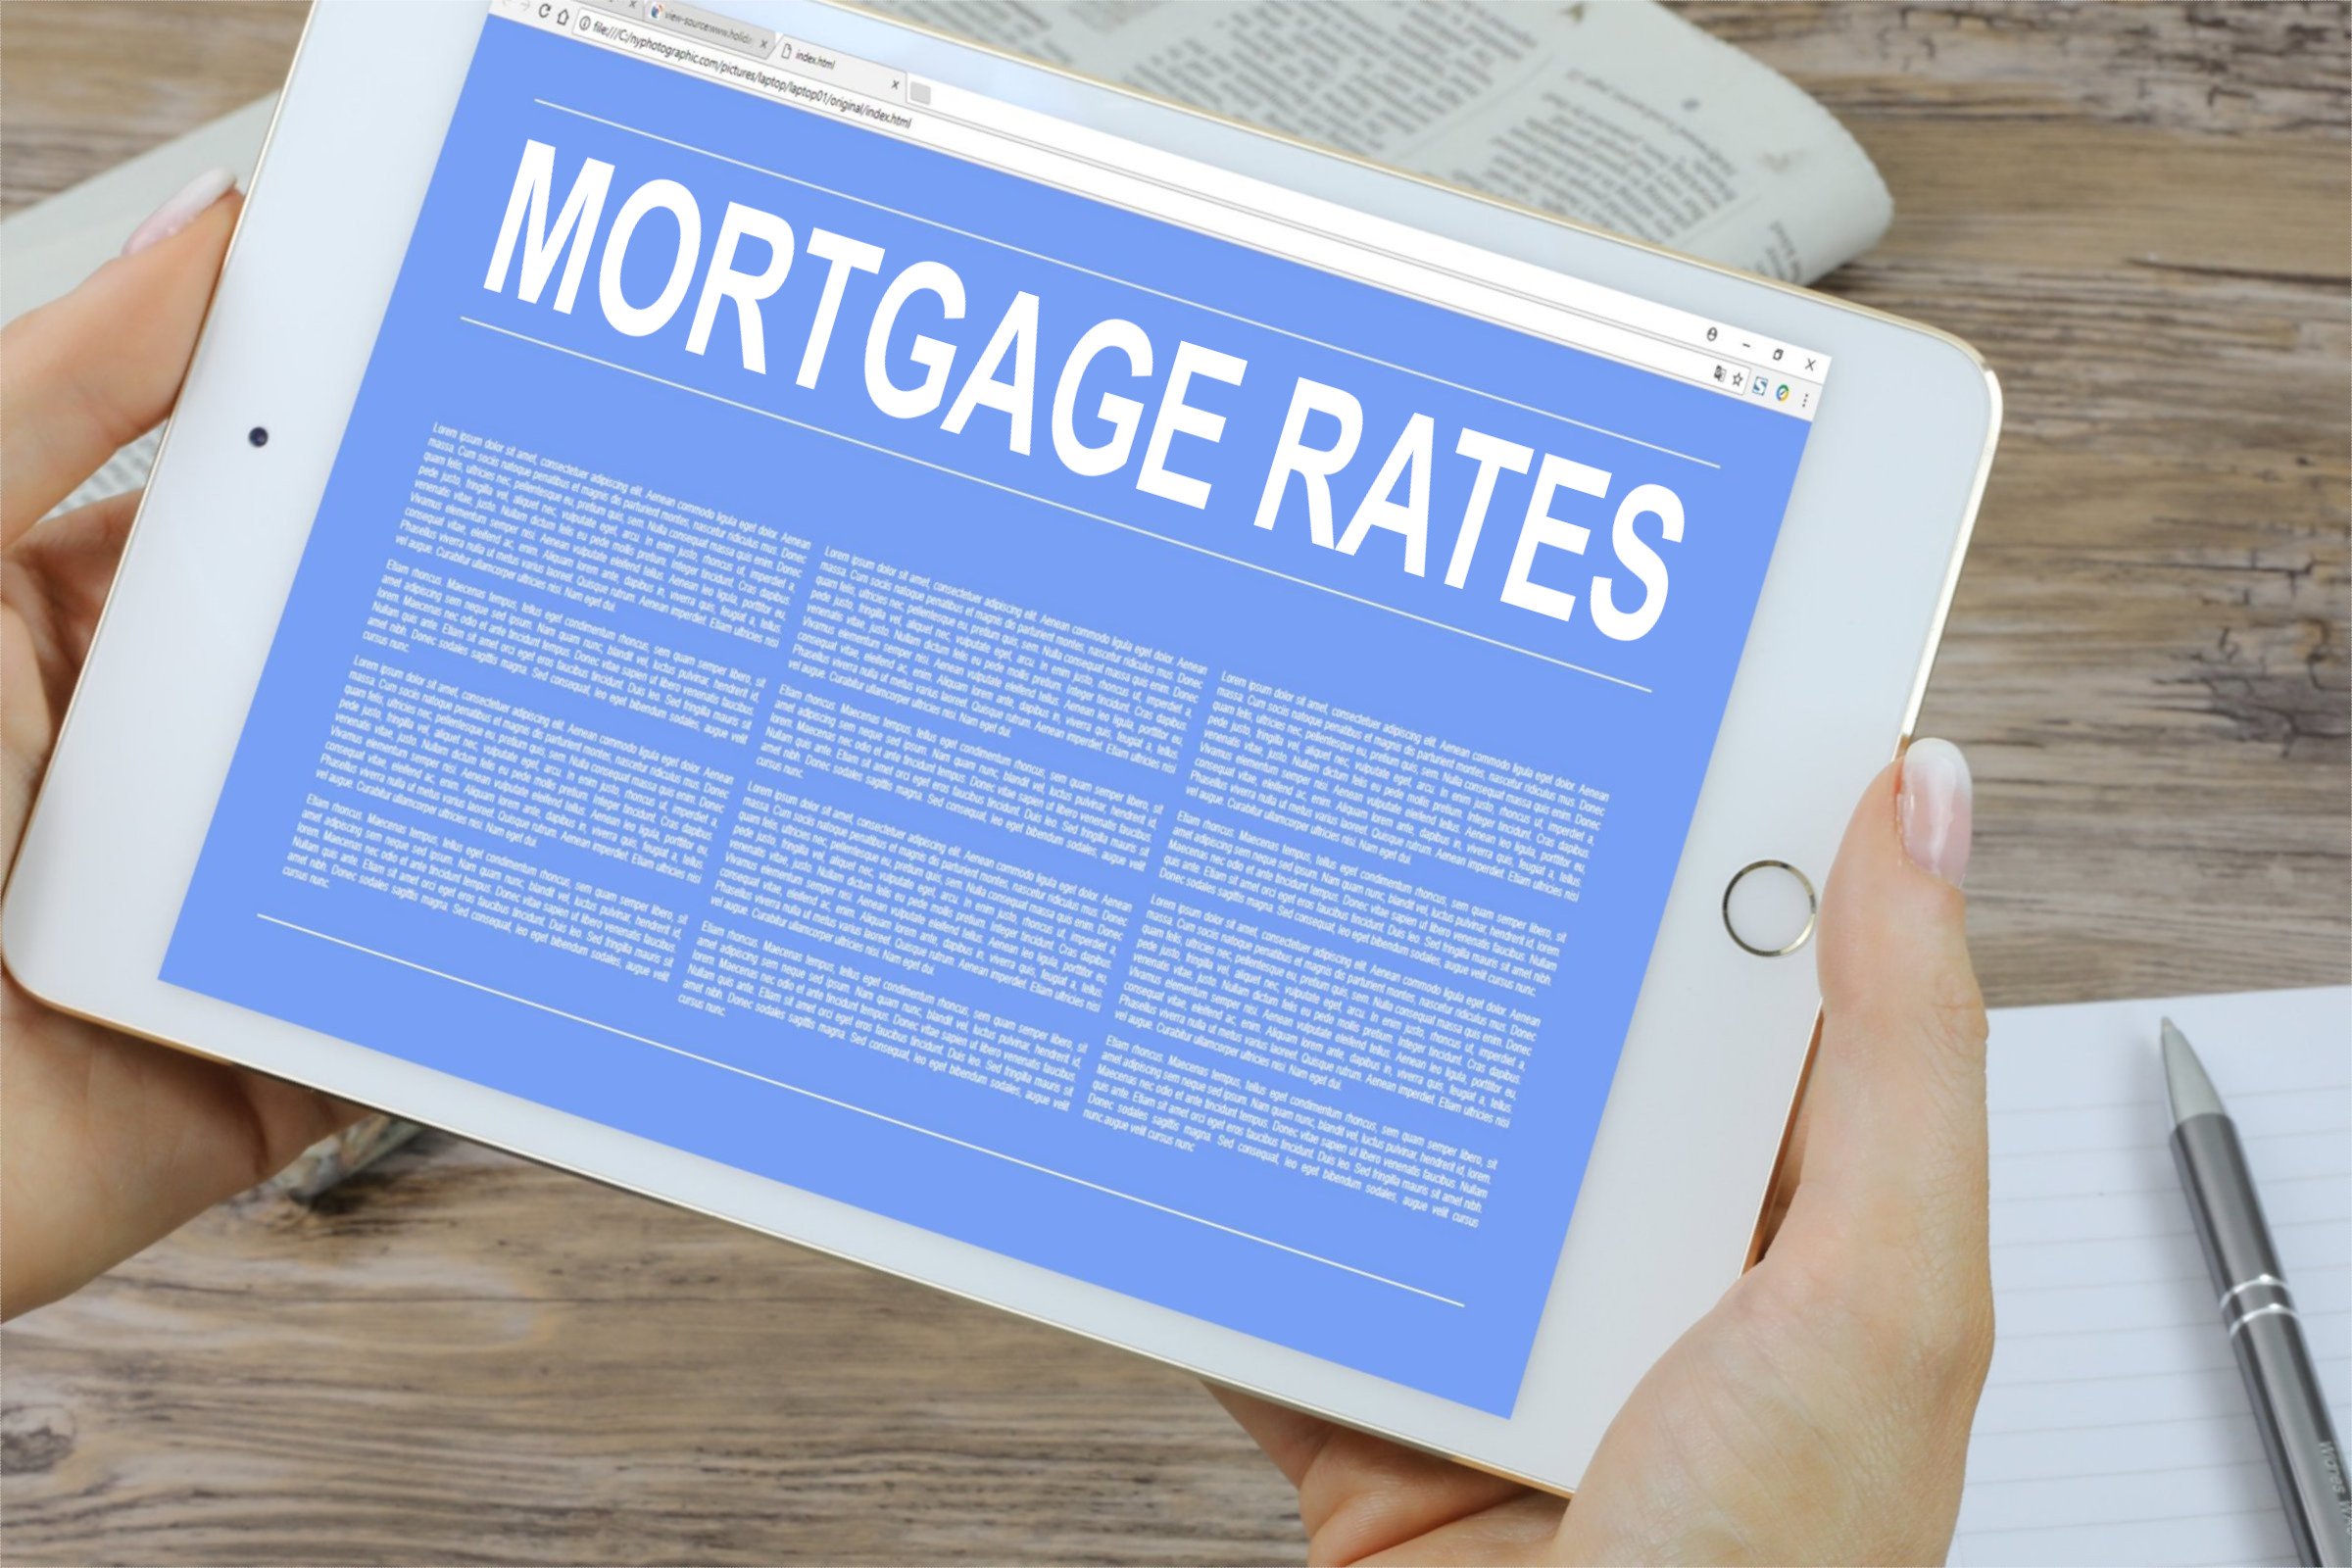 Free of Charge Creative Commons mortgage rates Image Tablet 1